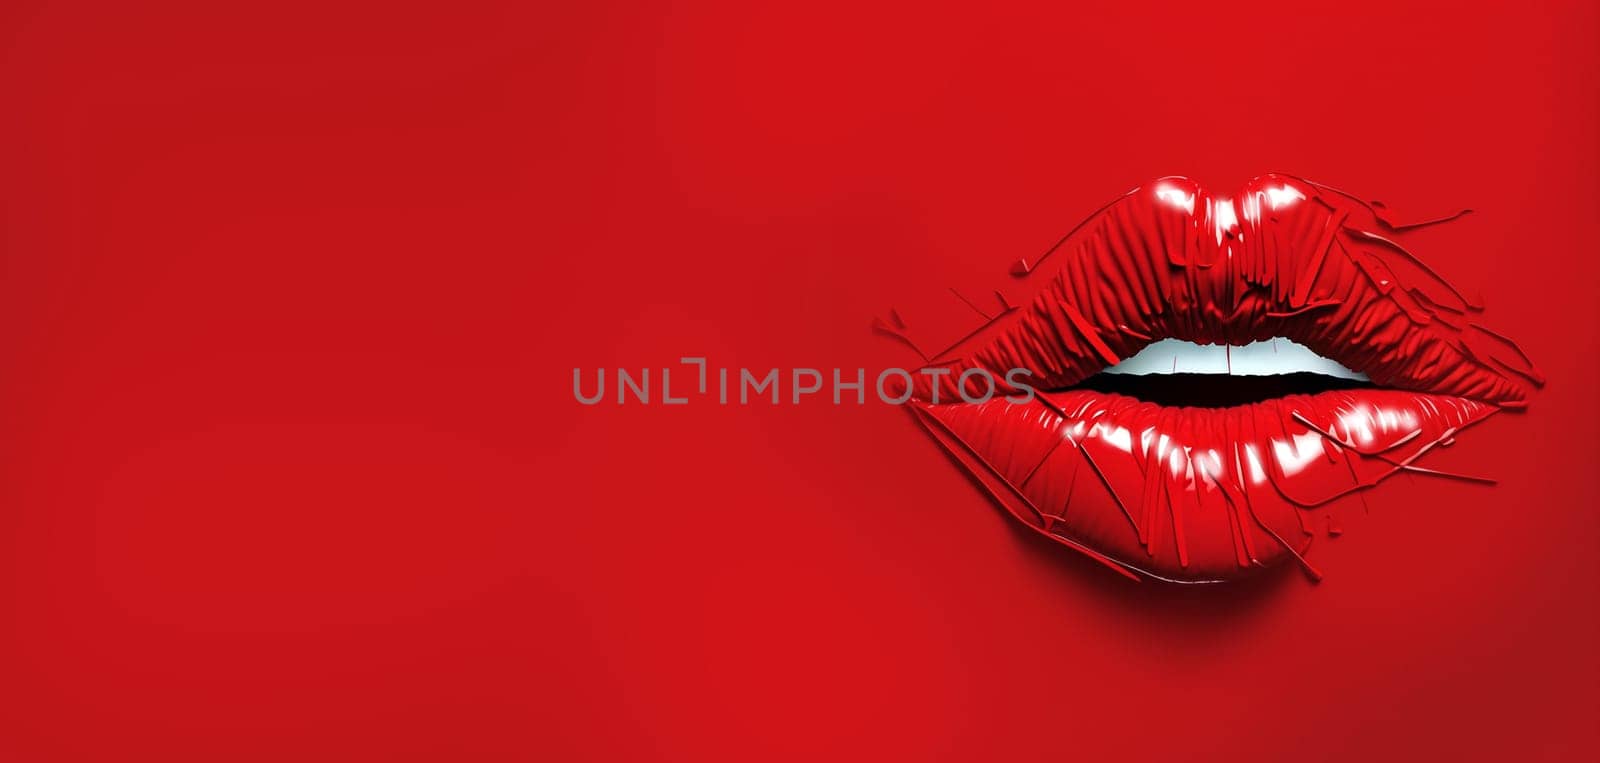 Lips women,kiss,mouth,lip pop art heart background.Valentines mothers day logo.Love,sexy,kiss,wedding card,background,banner.kissing sexy lips isolated icon. illustration.8 March Women's Day by Annebel146